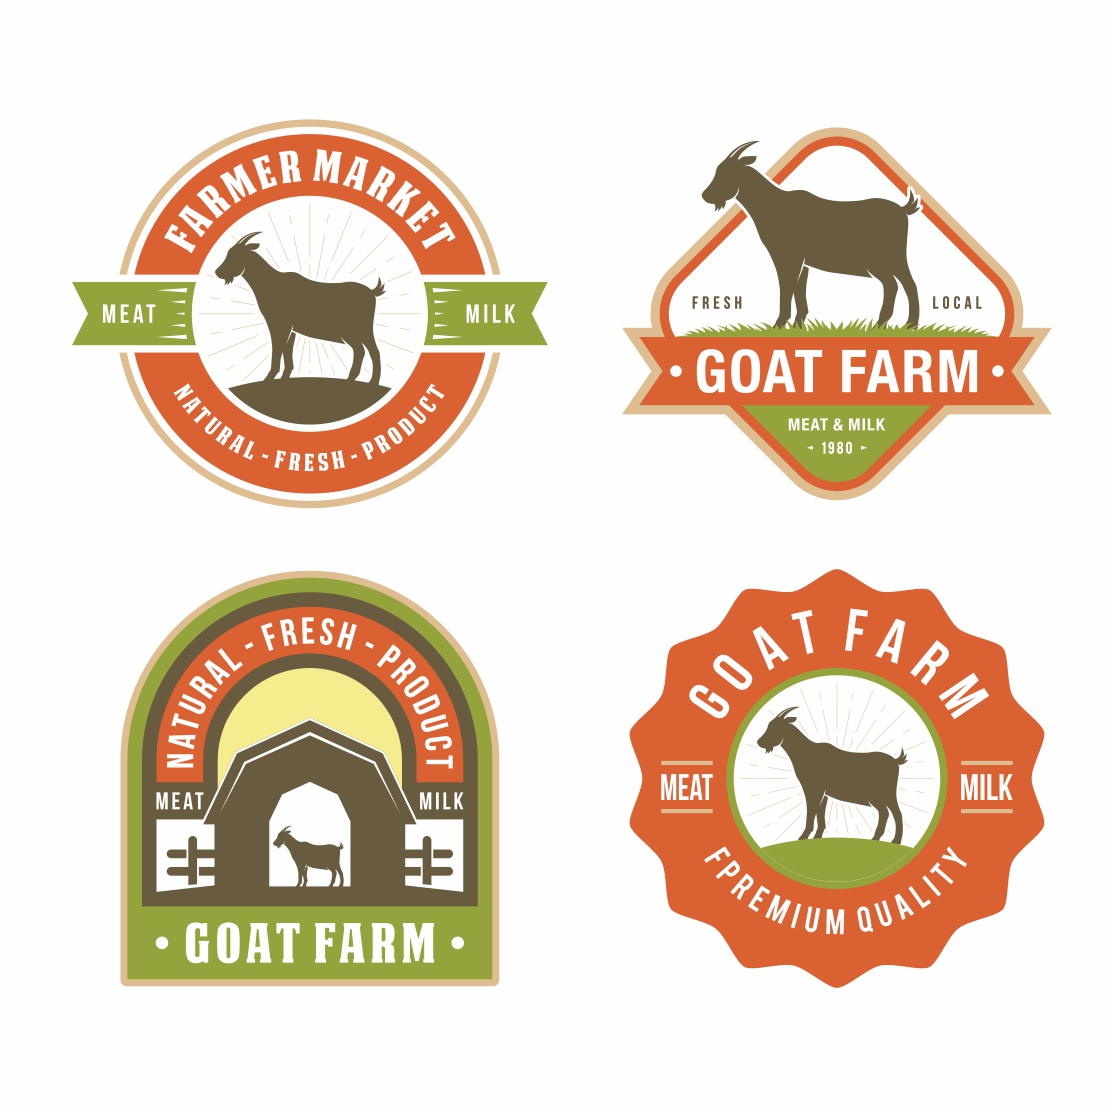 Goat Farm logo design collection - only 10$ preview image.